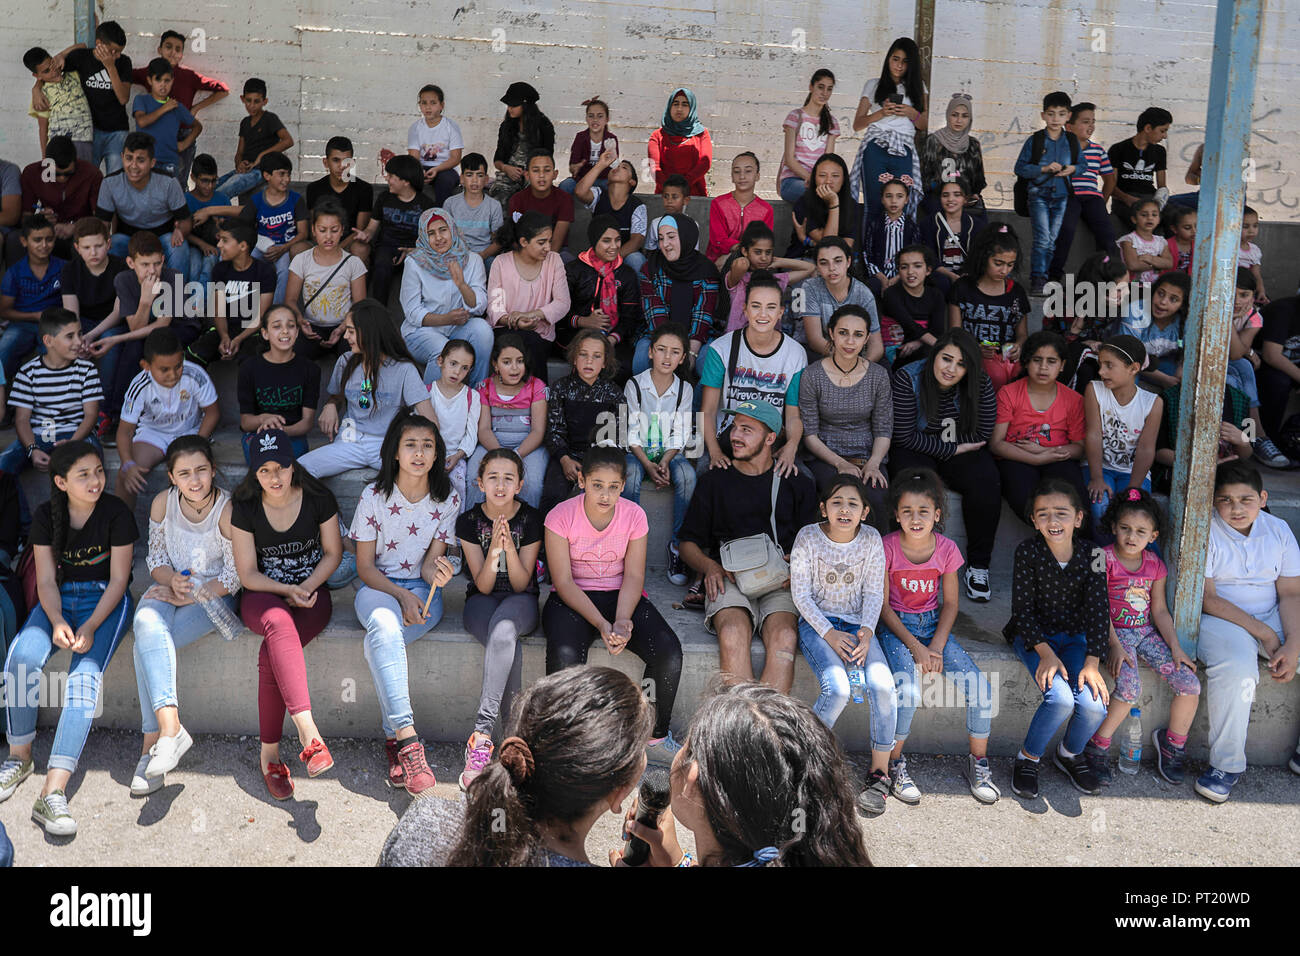 Bethlehem, Palestine. 9th Feb, 2018. Students seen sited watching their friends singing in the courtyard during the summer camp.The Return Summer Camp was organised for children of the Aida refugee camp, it was established in 1950 by the Palestinians who were expelled from their homes from 27 towns throughout Palestine, namely Nasra, Tabaria, Jerusalem, Acre, Jaffa, Haifa and Hebron. This is a 4th generation of refugees, 130 children ranging from 4 to 16 years of age being overlooked by 20 instructors and volunteers and it was funded by the UN until 2000. (Credit Image: © Enzo Tomasiello Stock Photo